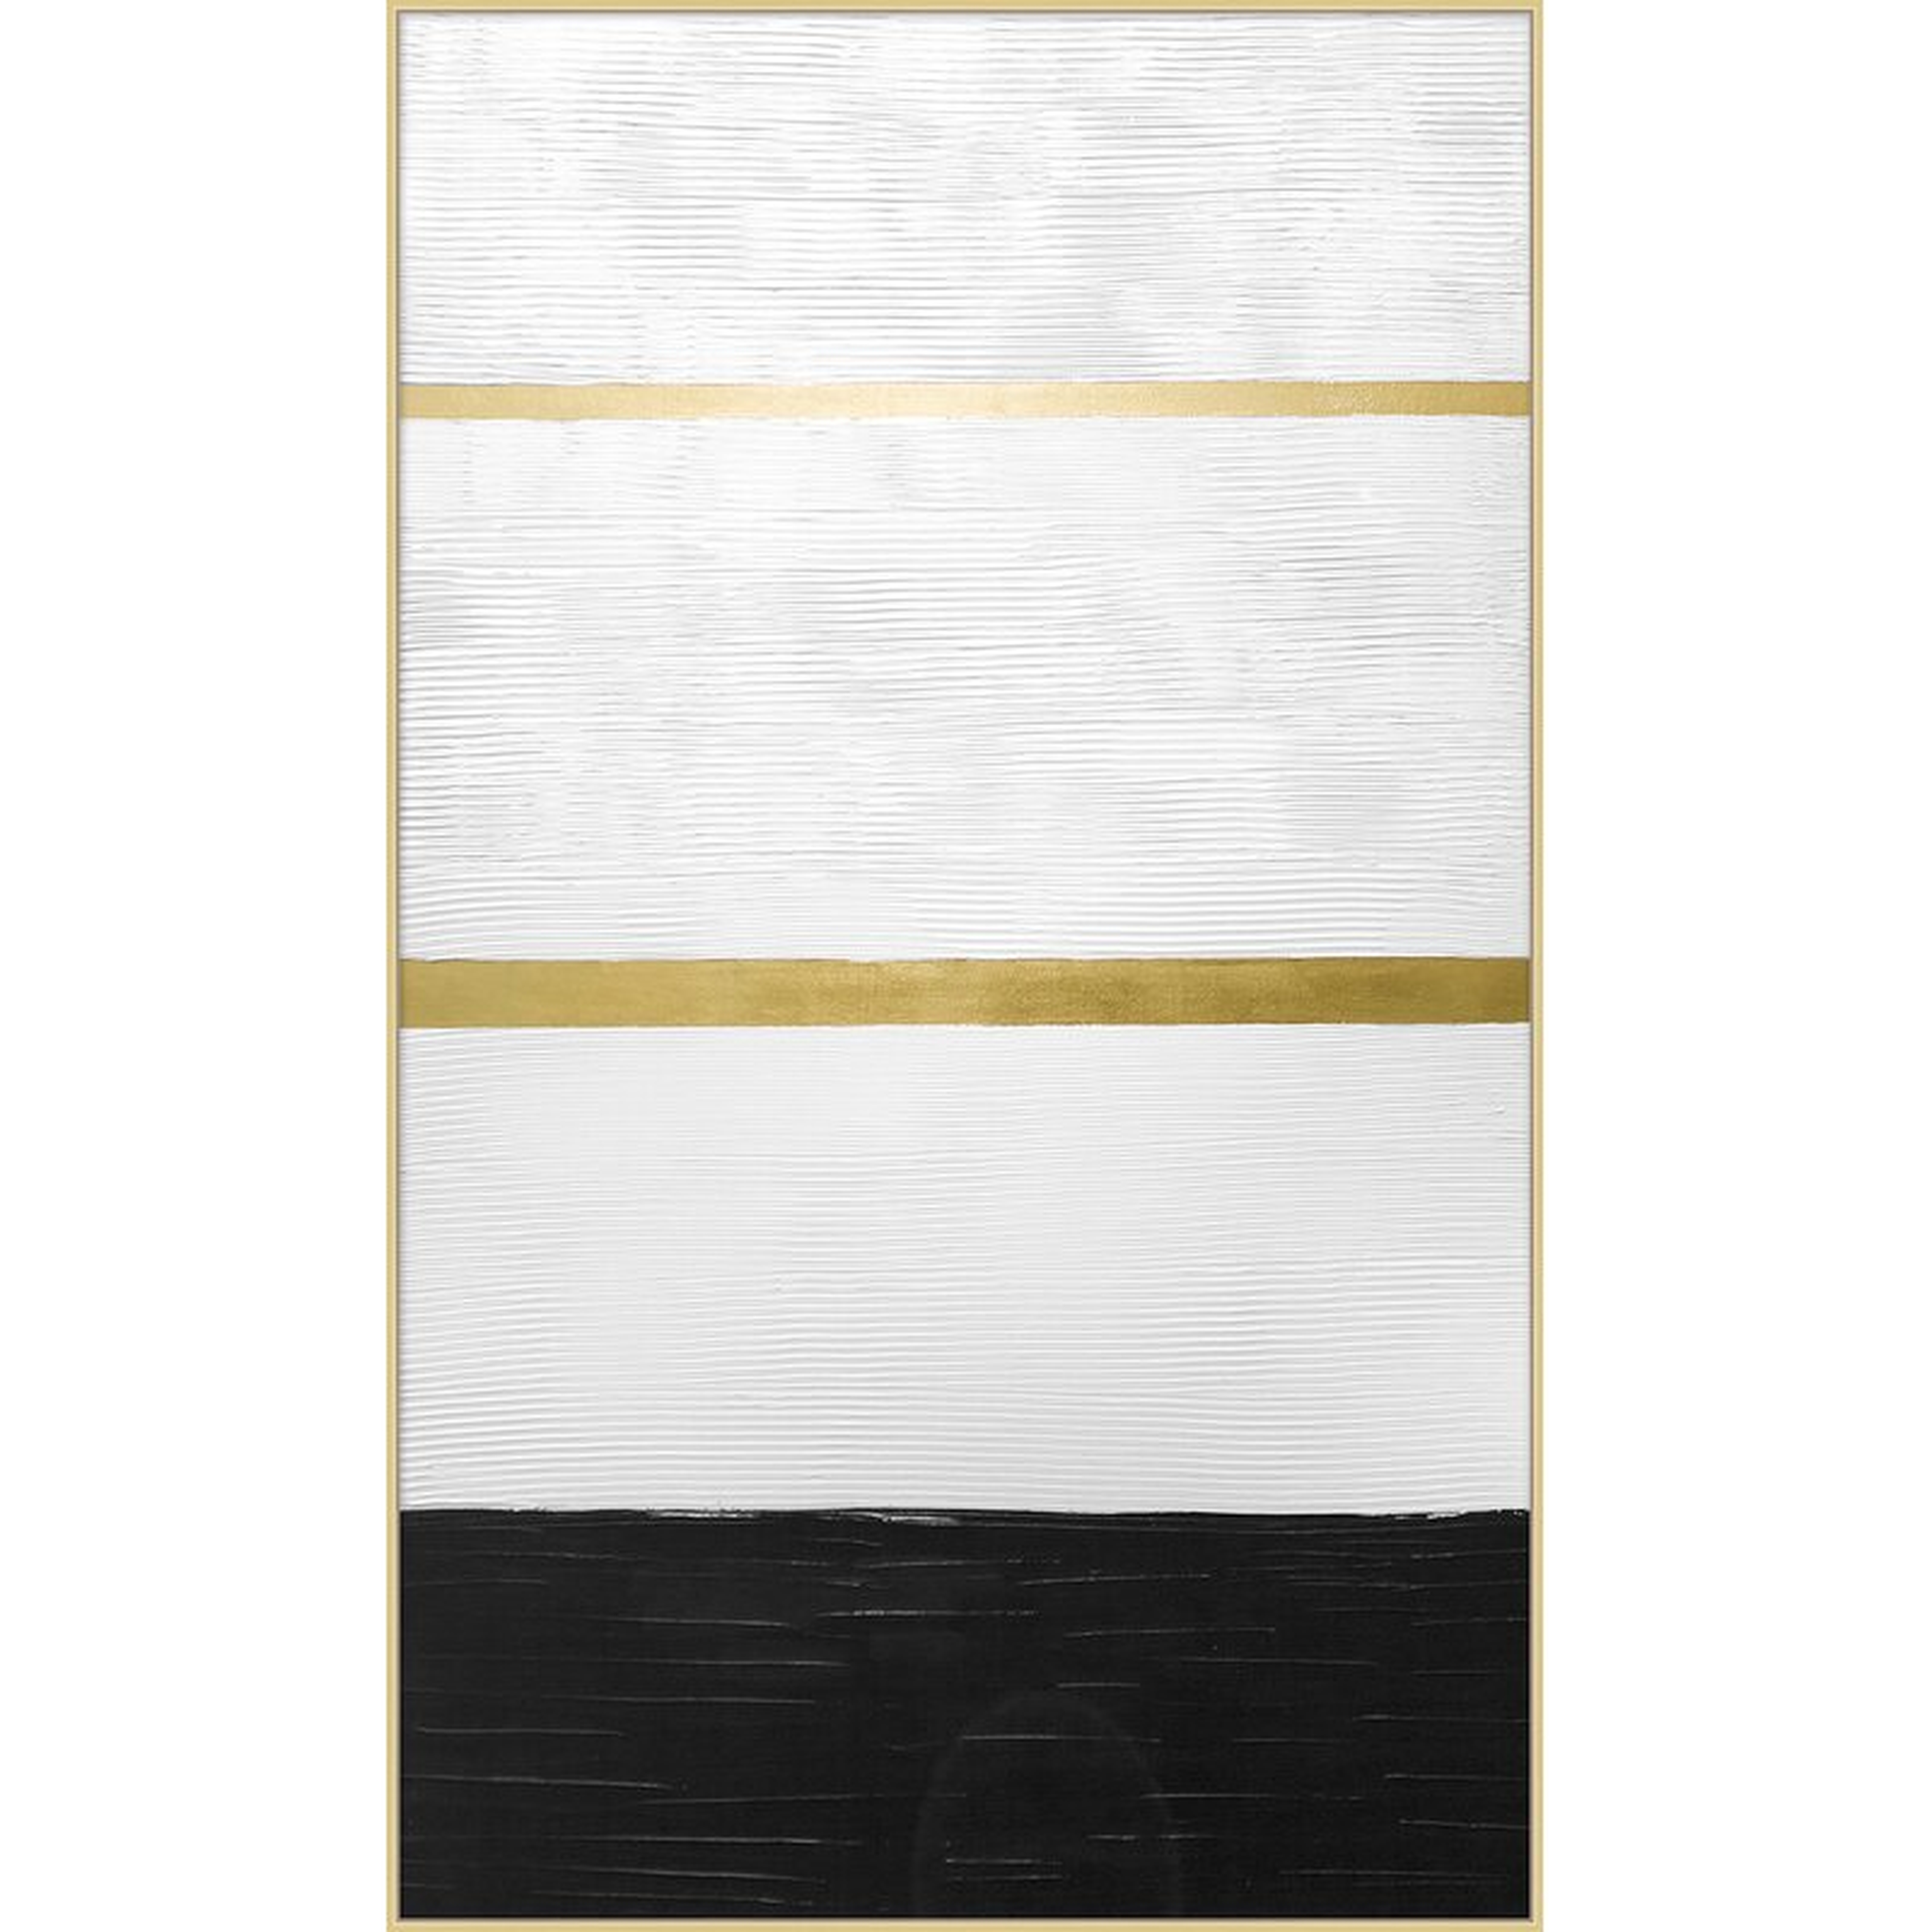 Wendover Art Group Black and Gold 2 by Thom Filicia - Floater Frame Painting Print on Canvas - Perigold